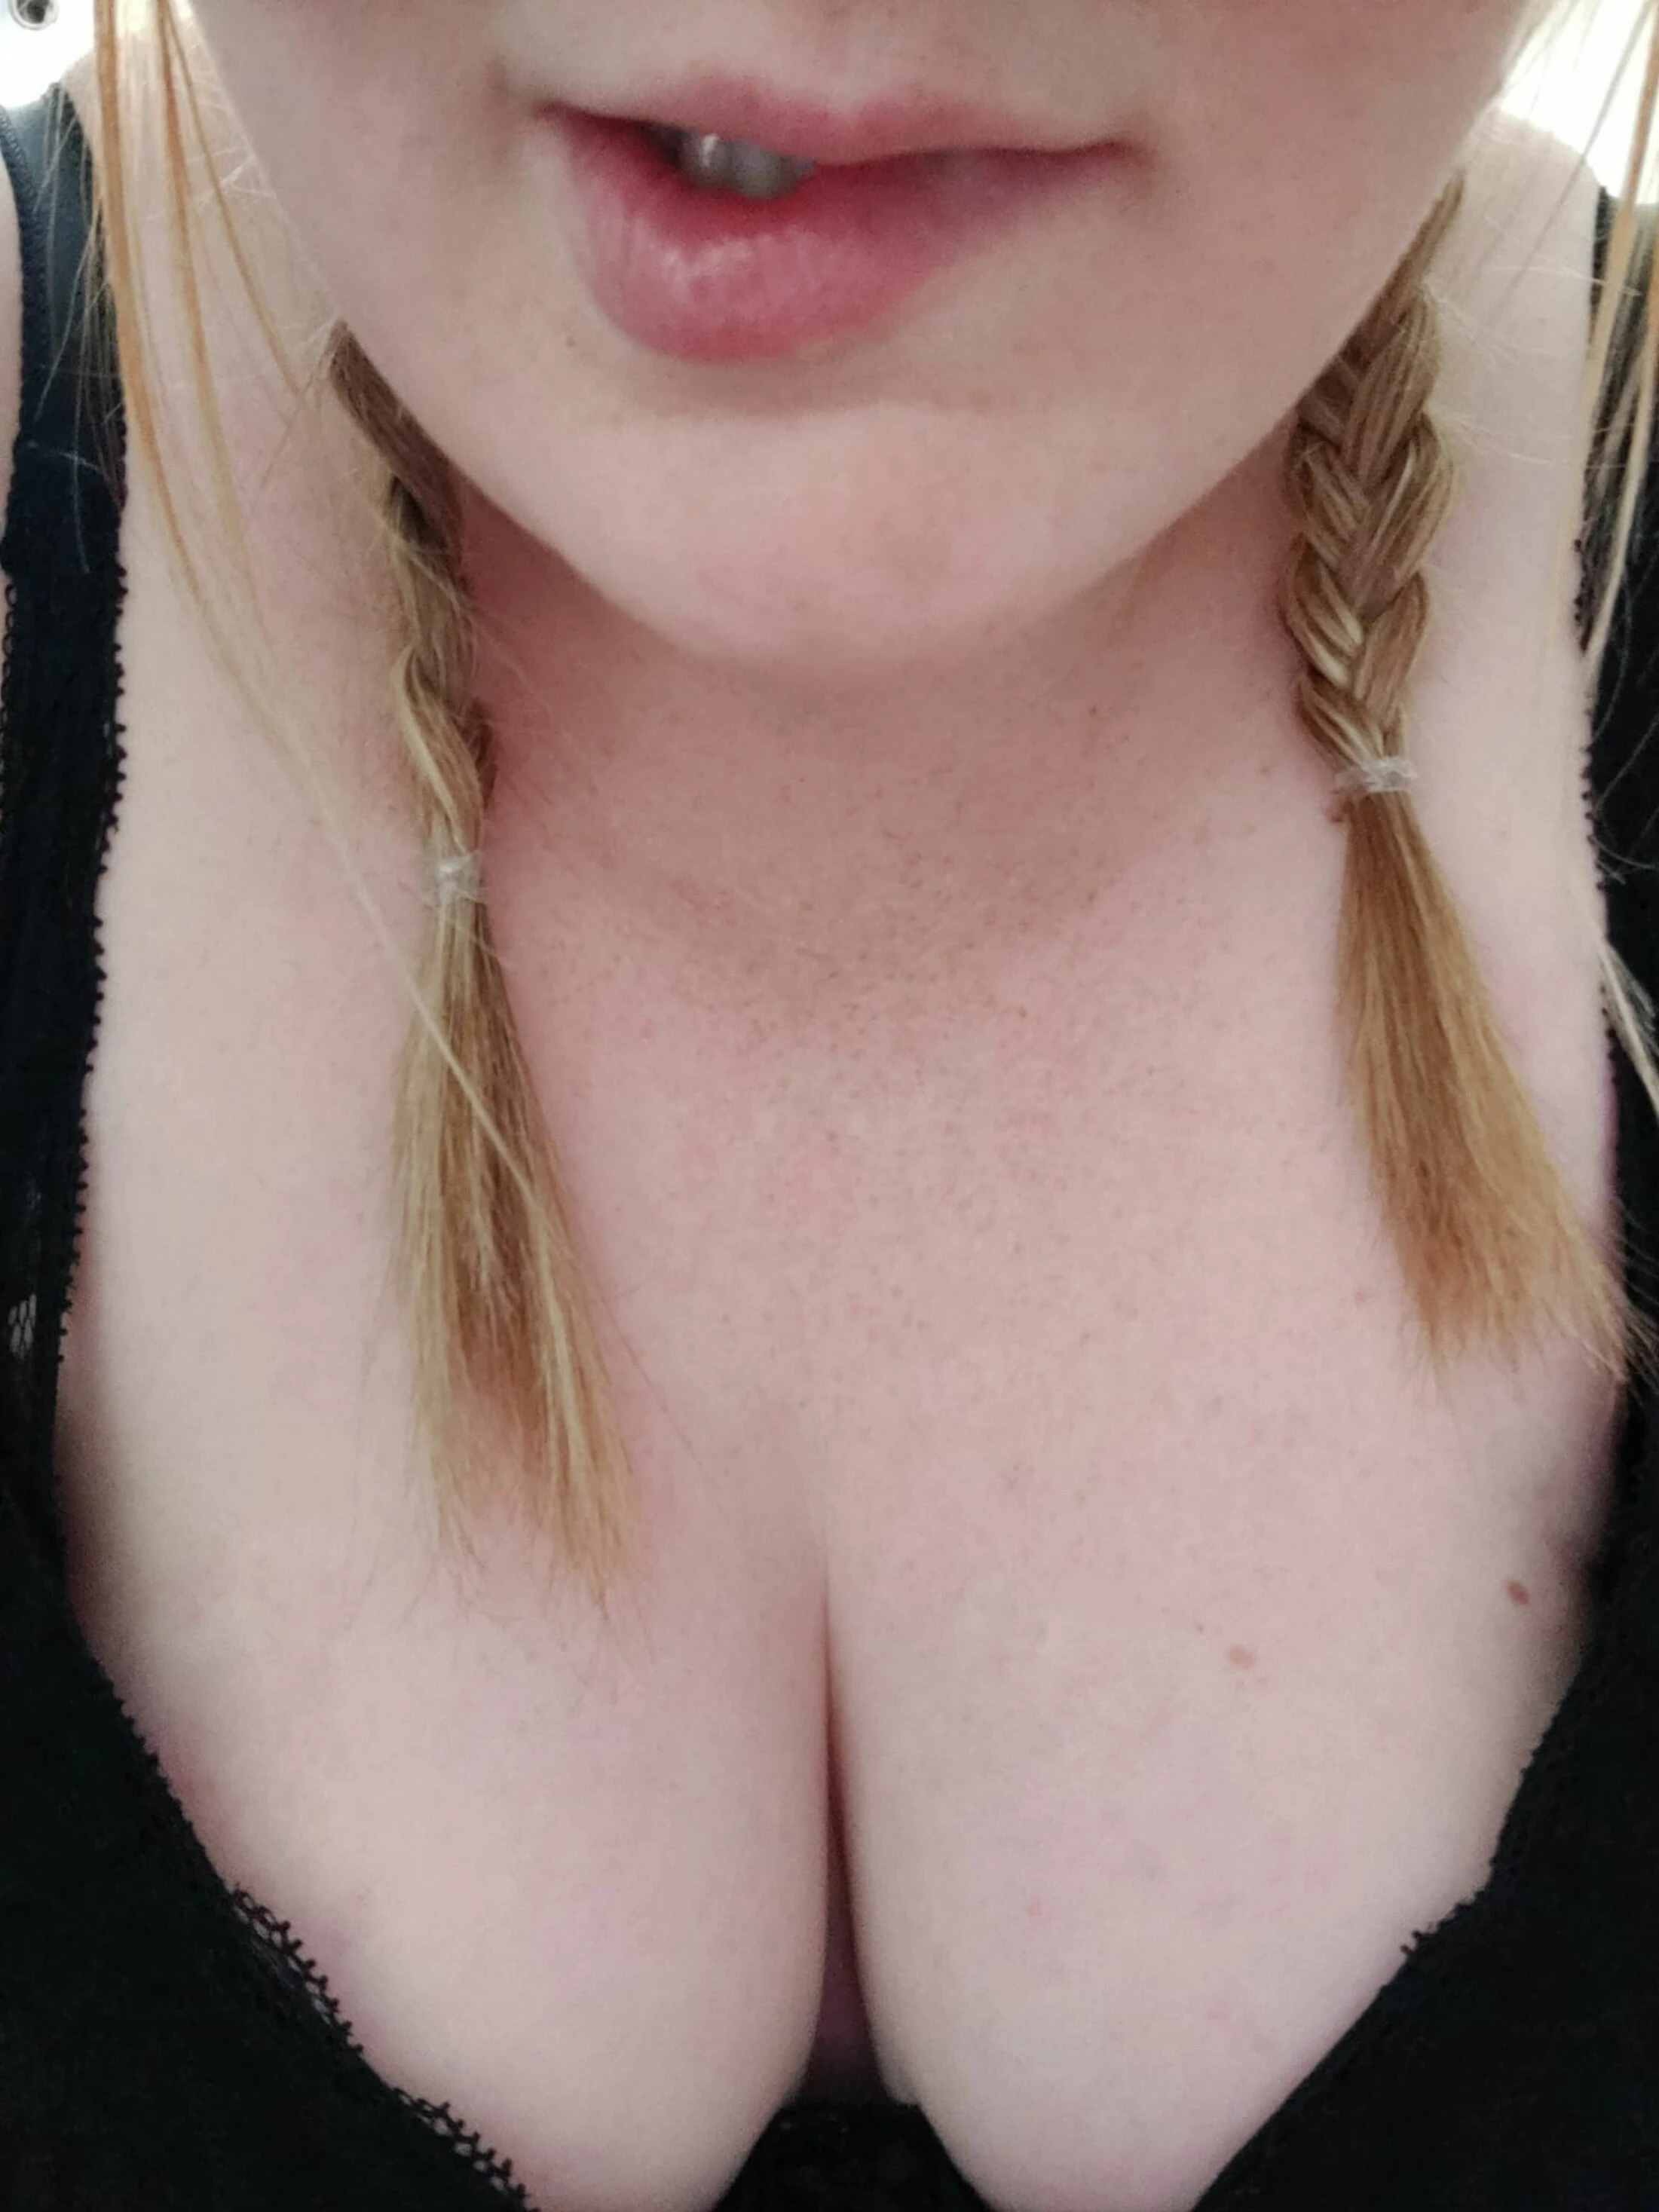 Black bra, and pigtails. Channelling Britney x